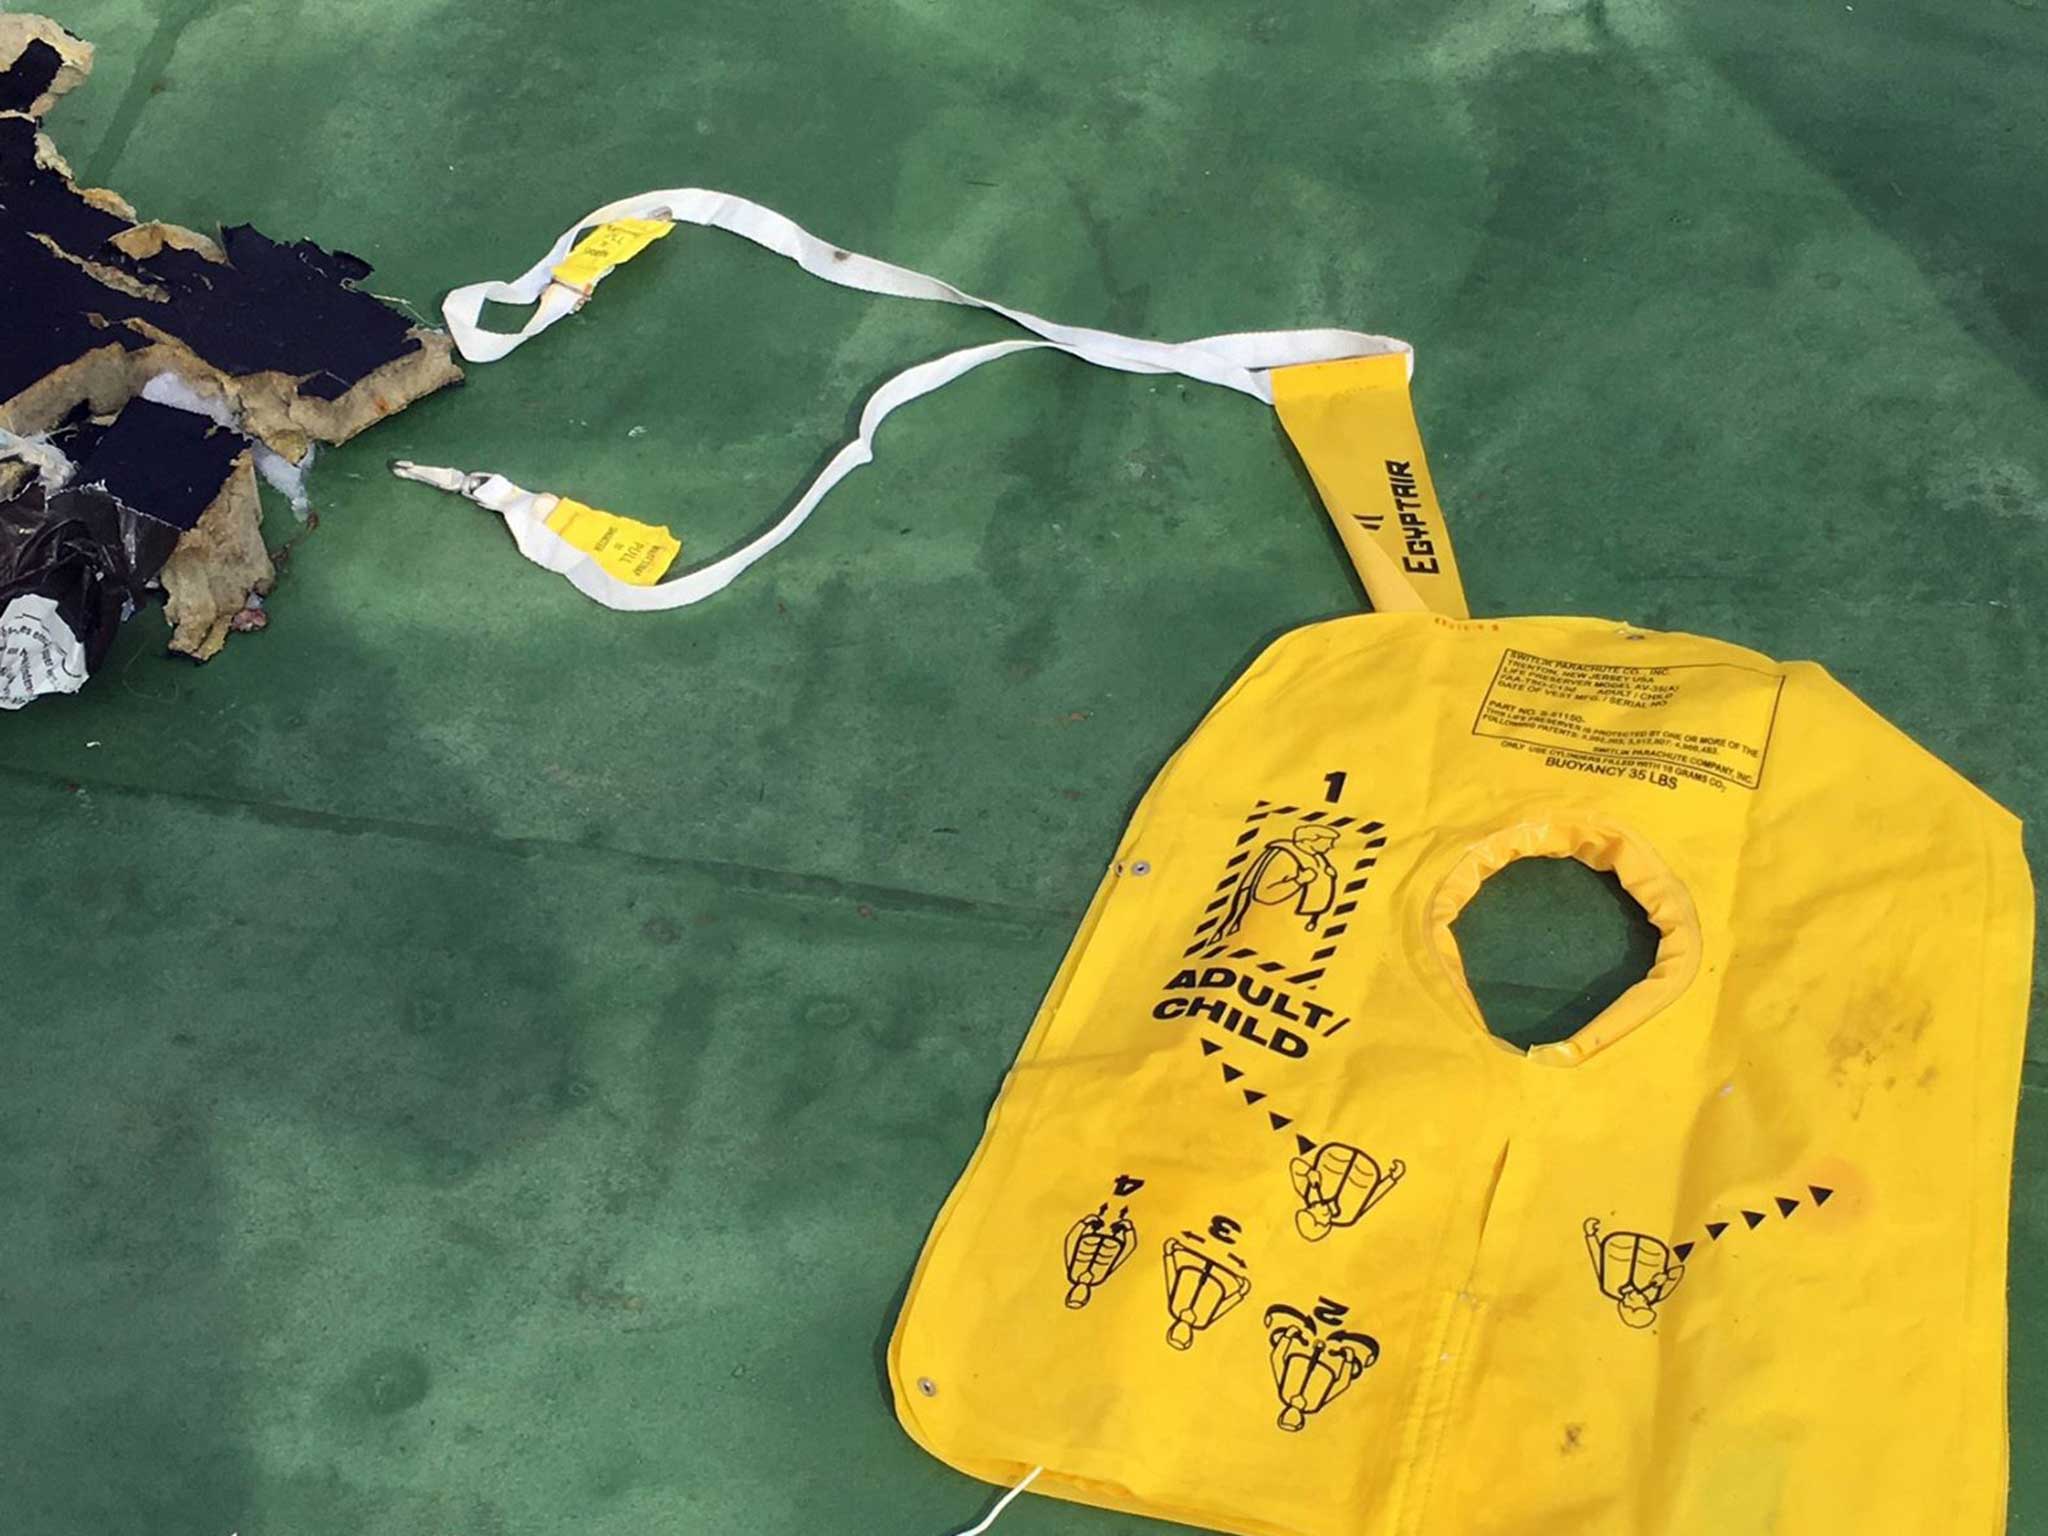 The Egyptian military spokesman released pictures of debris that the search teams found in the sea after the EgyptAir Airbus A320 crashed in the Mediterranean